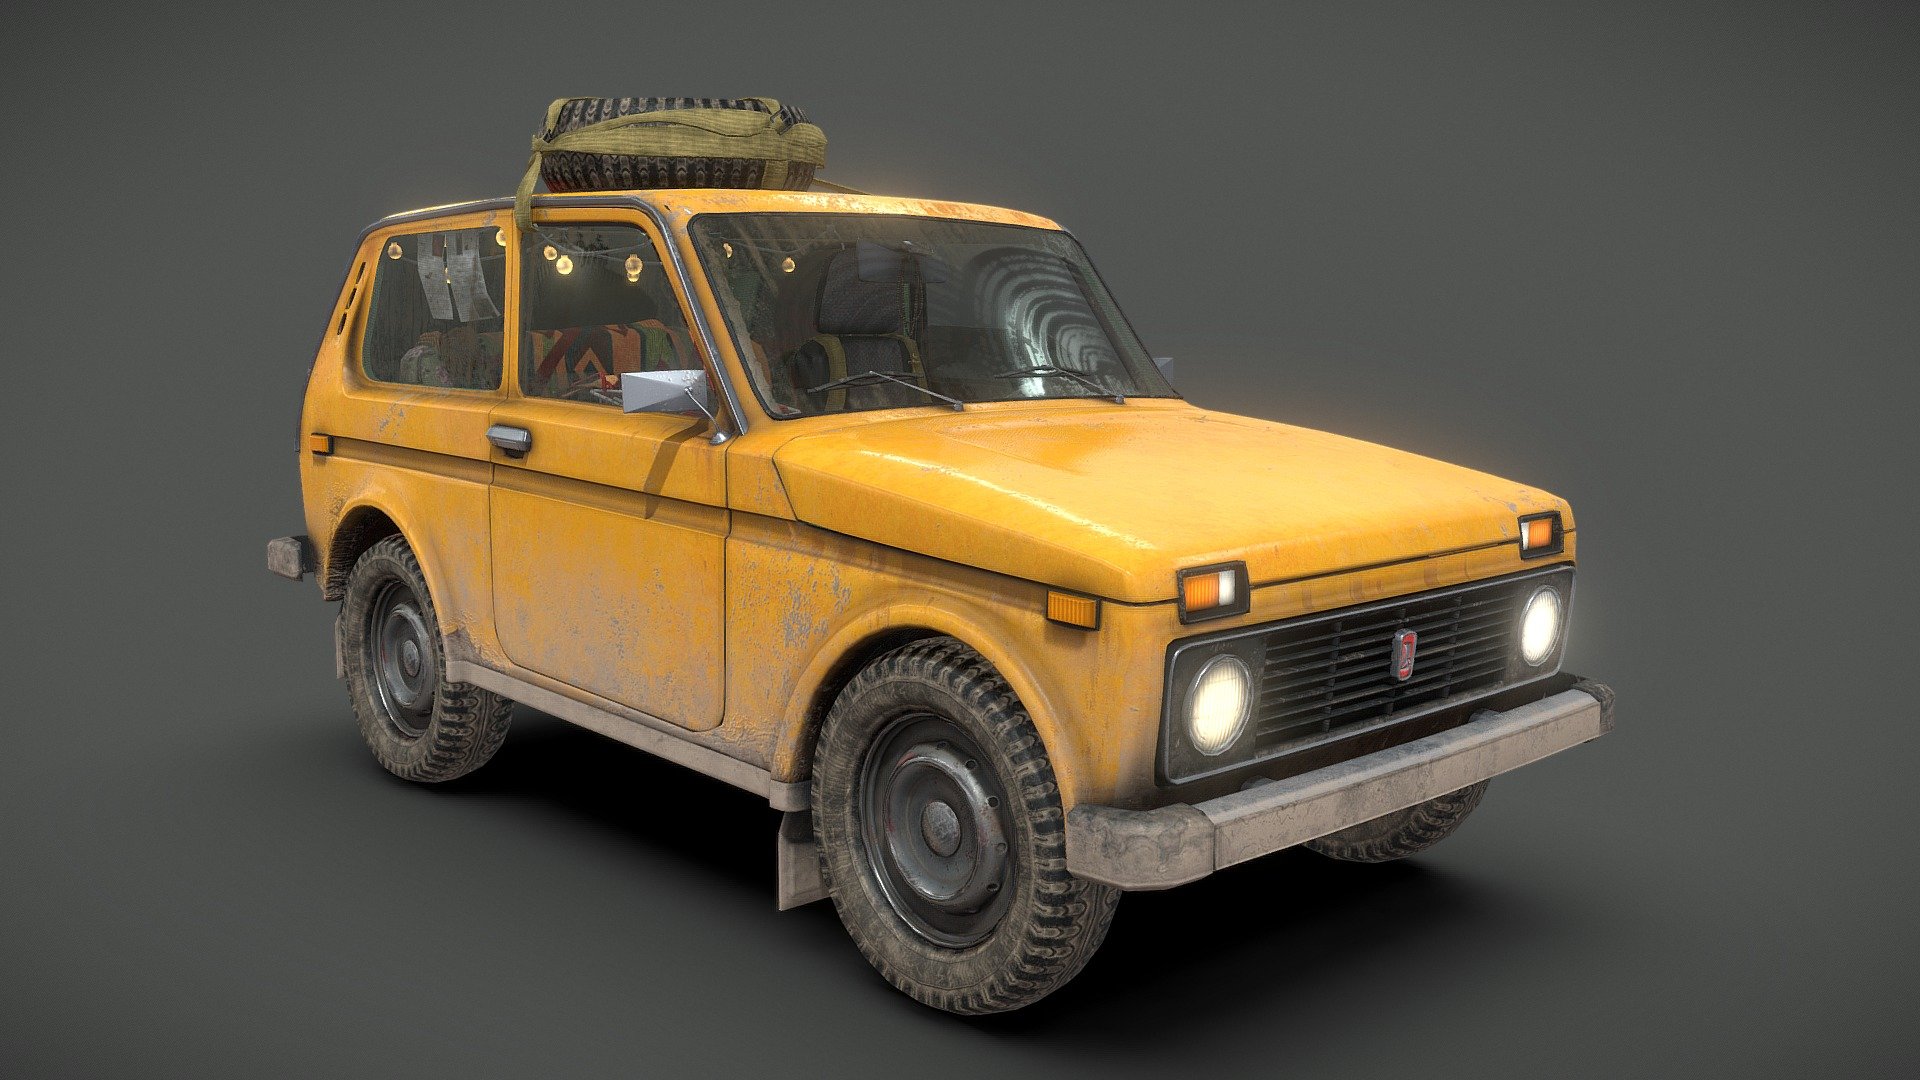 Someones (mostly) 1980's Lada Niva, I heard it was a Romanian woman last driving this during some sort of calamity, probably lived in it as well judging by the smell.

correct polyflow and topology, not completely retopologised and game ready, especially not the added interior props. Mostly an excersice in modeling, rendering and texturing. I have done so much retopoly over the past year I figgured I could skip it for once ;). It has some SCP related eastereggs in the car for fun 3d model